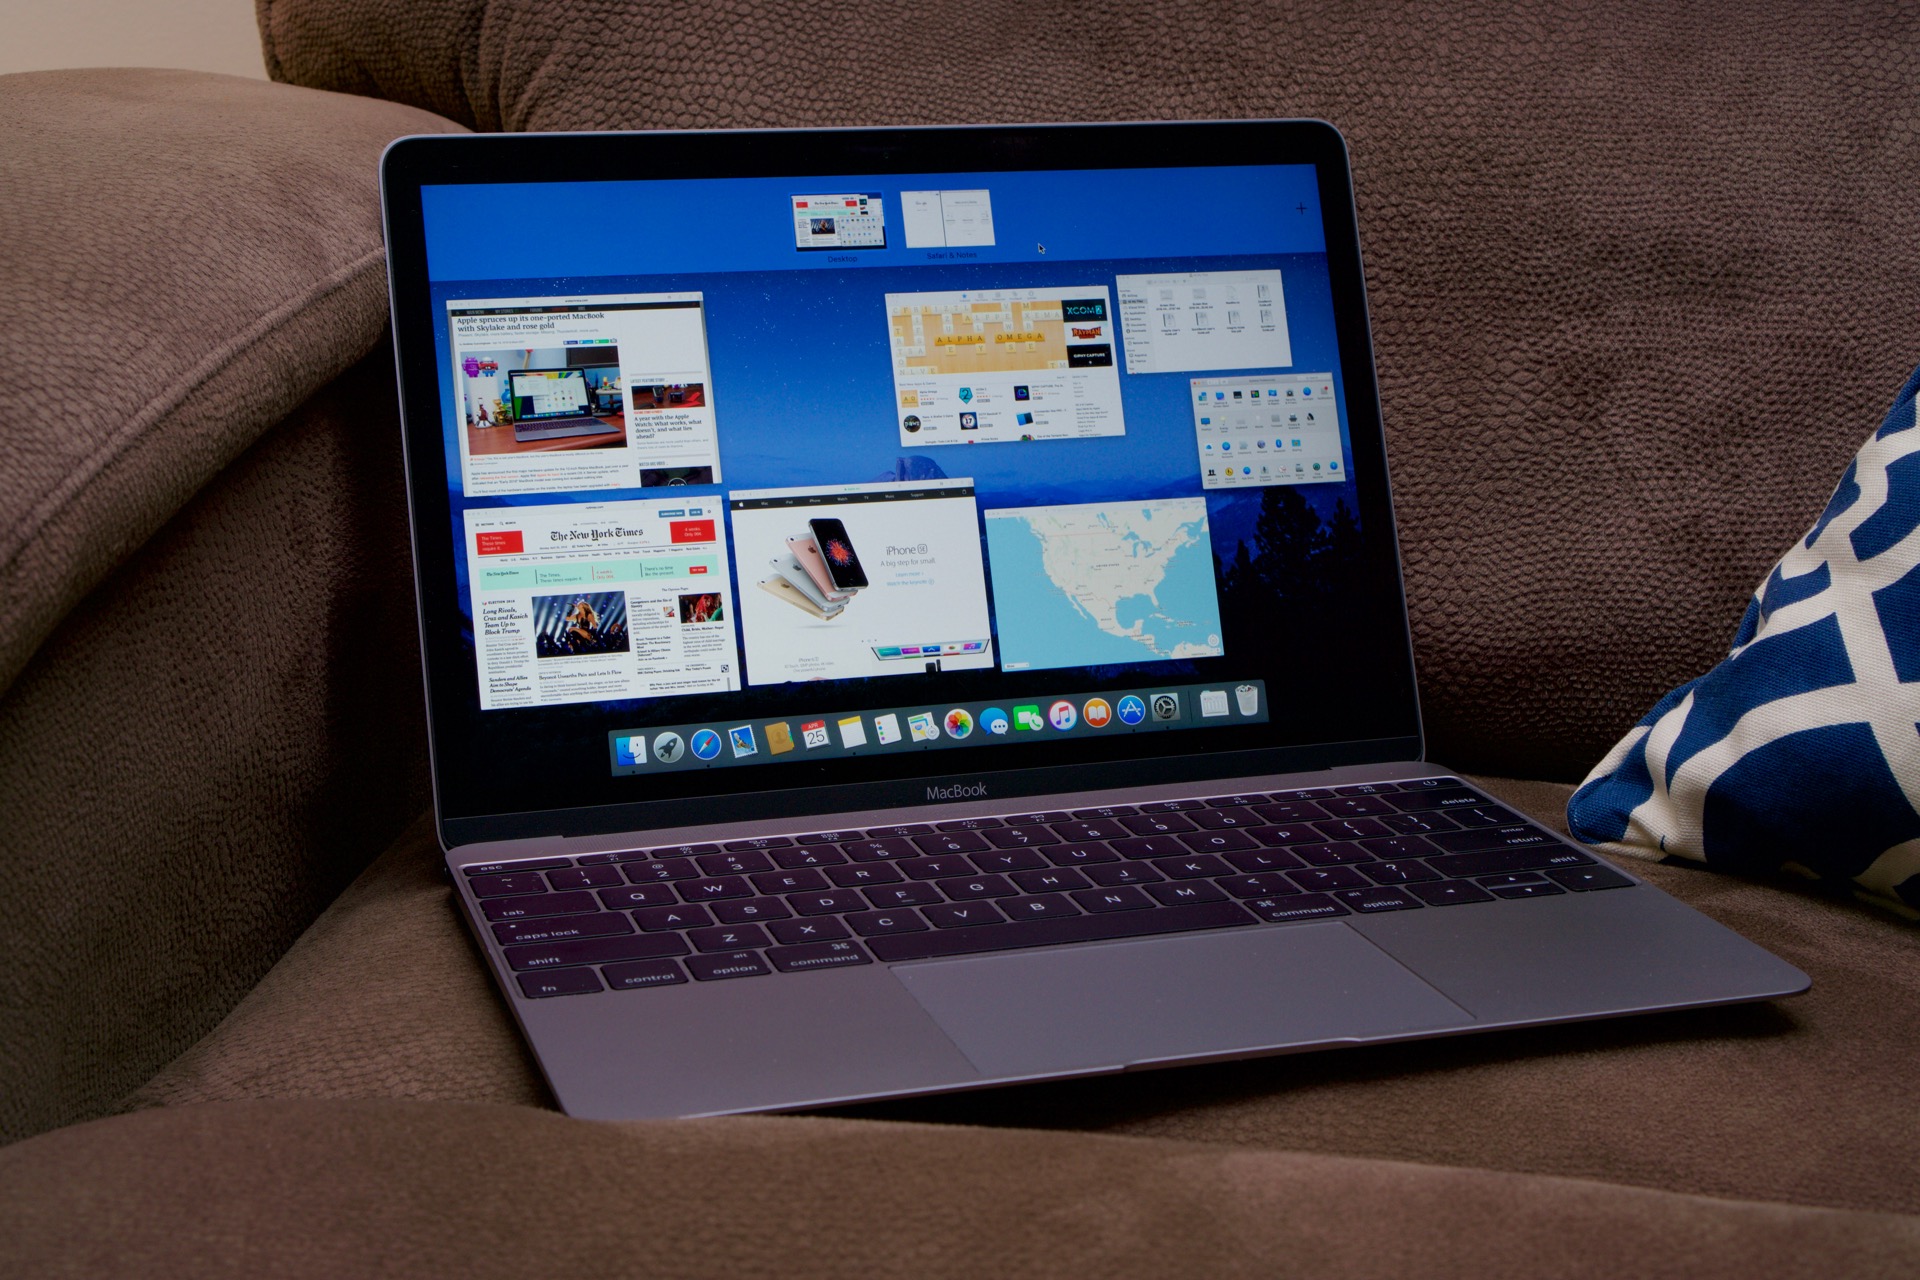 Review: The 2016 Retina MacBook is a faster version of the same